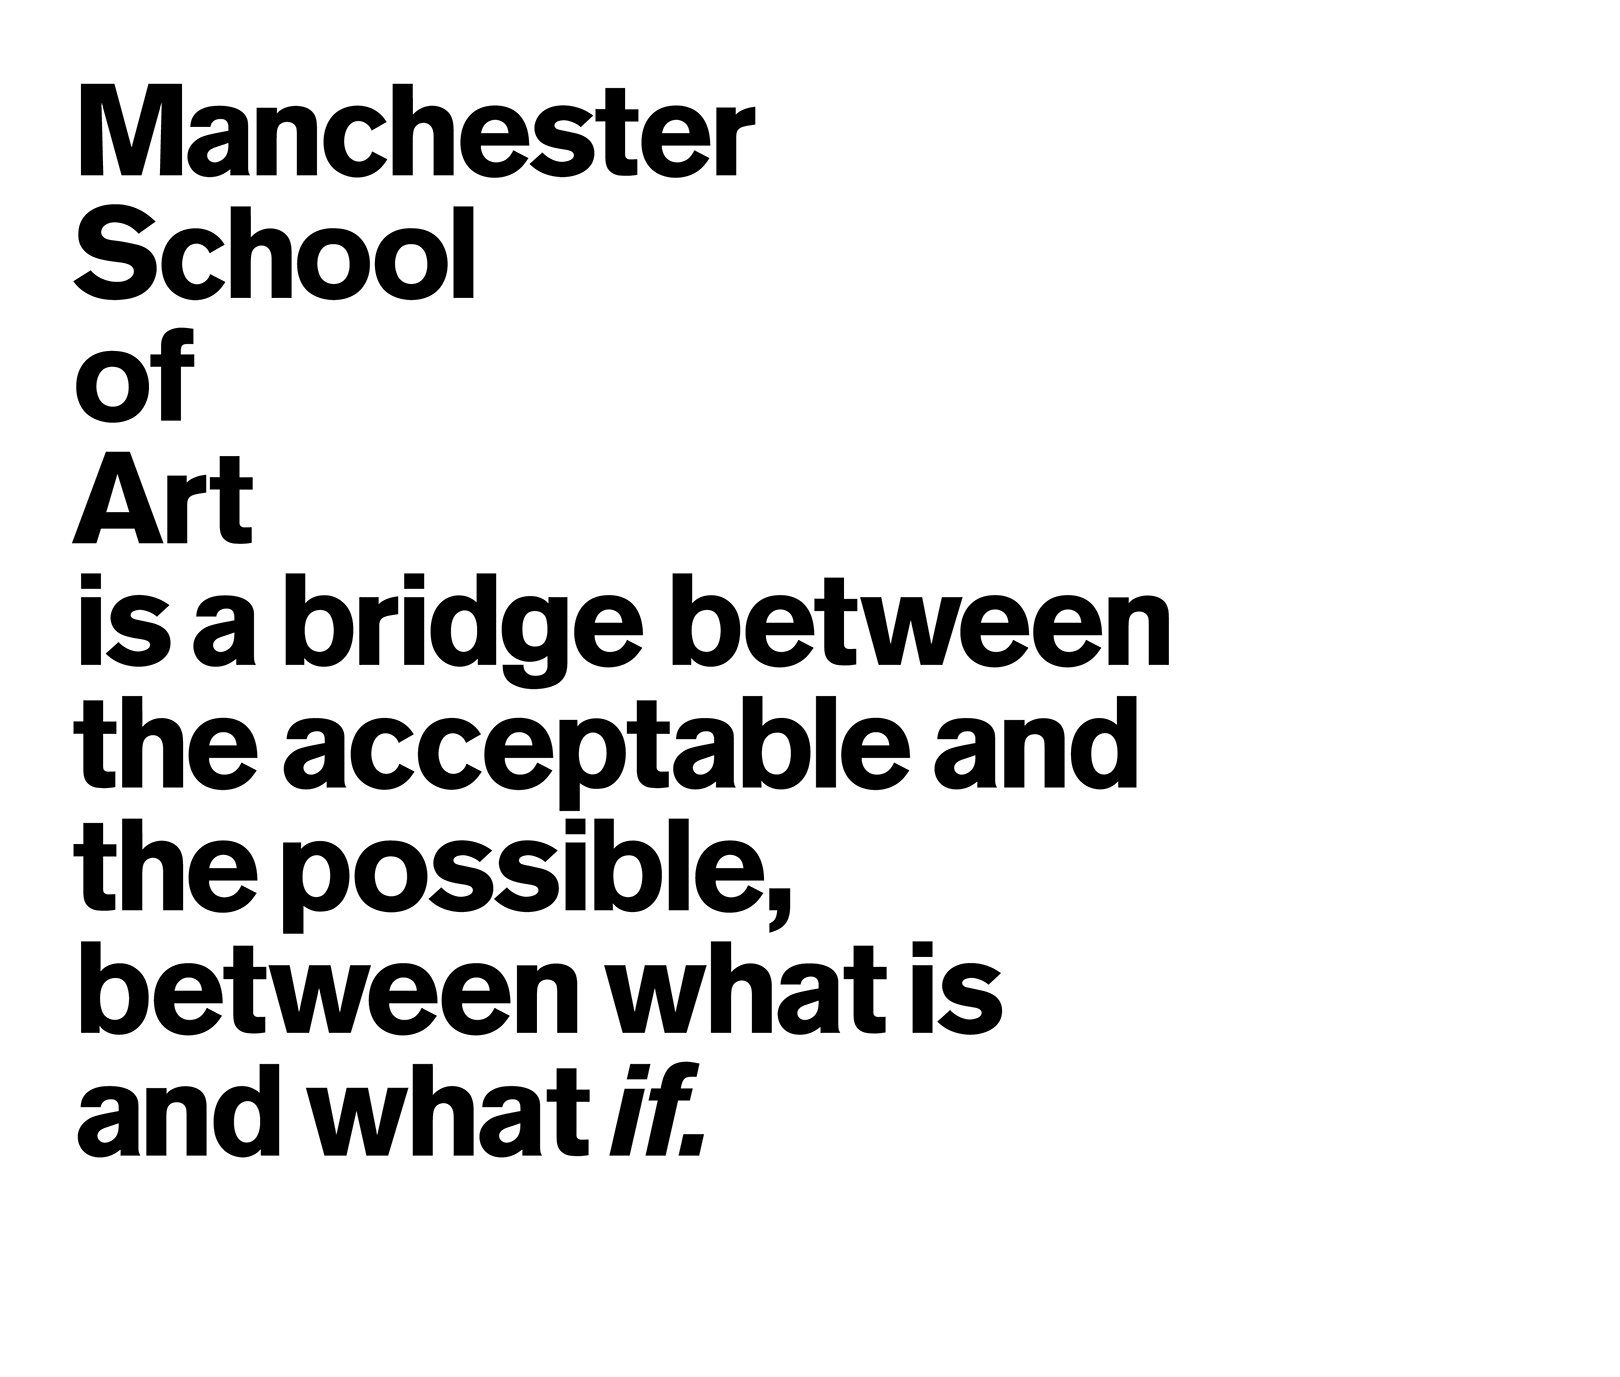 Manchester School of Art is a bridge between the acceptable and the possible, the bridge between what is and what if.